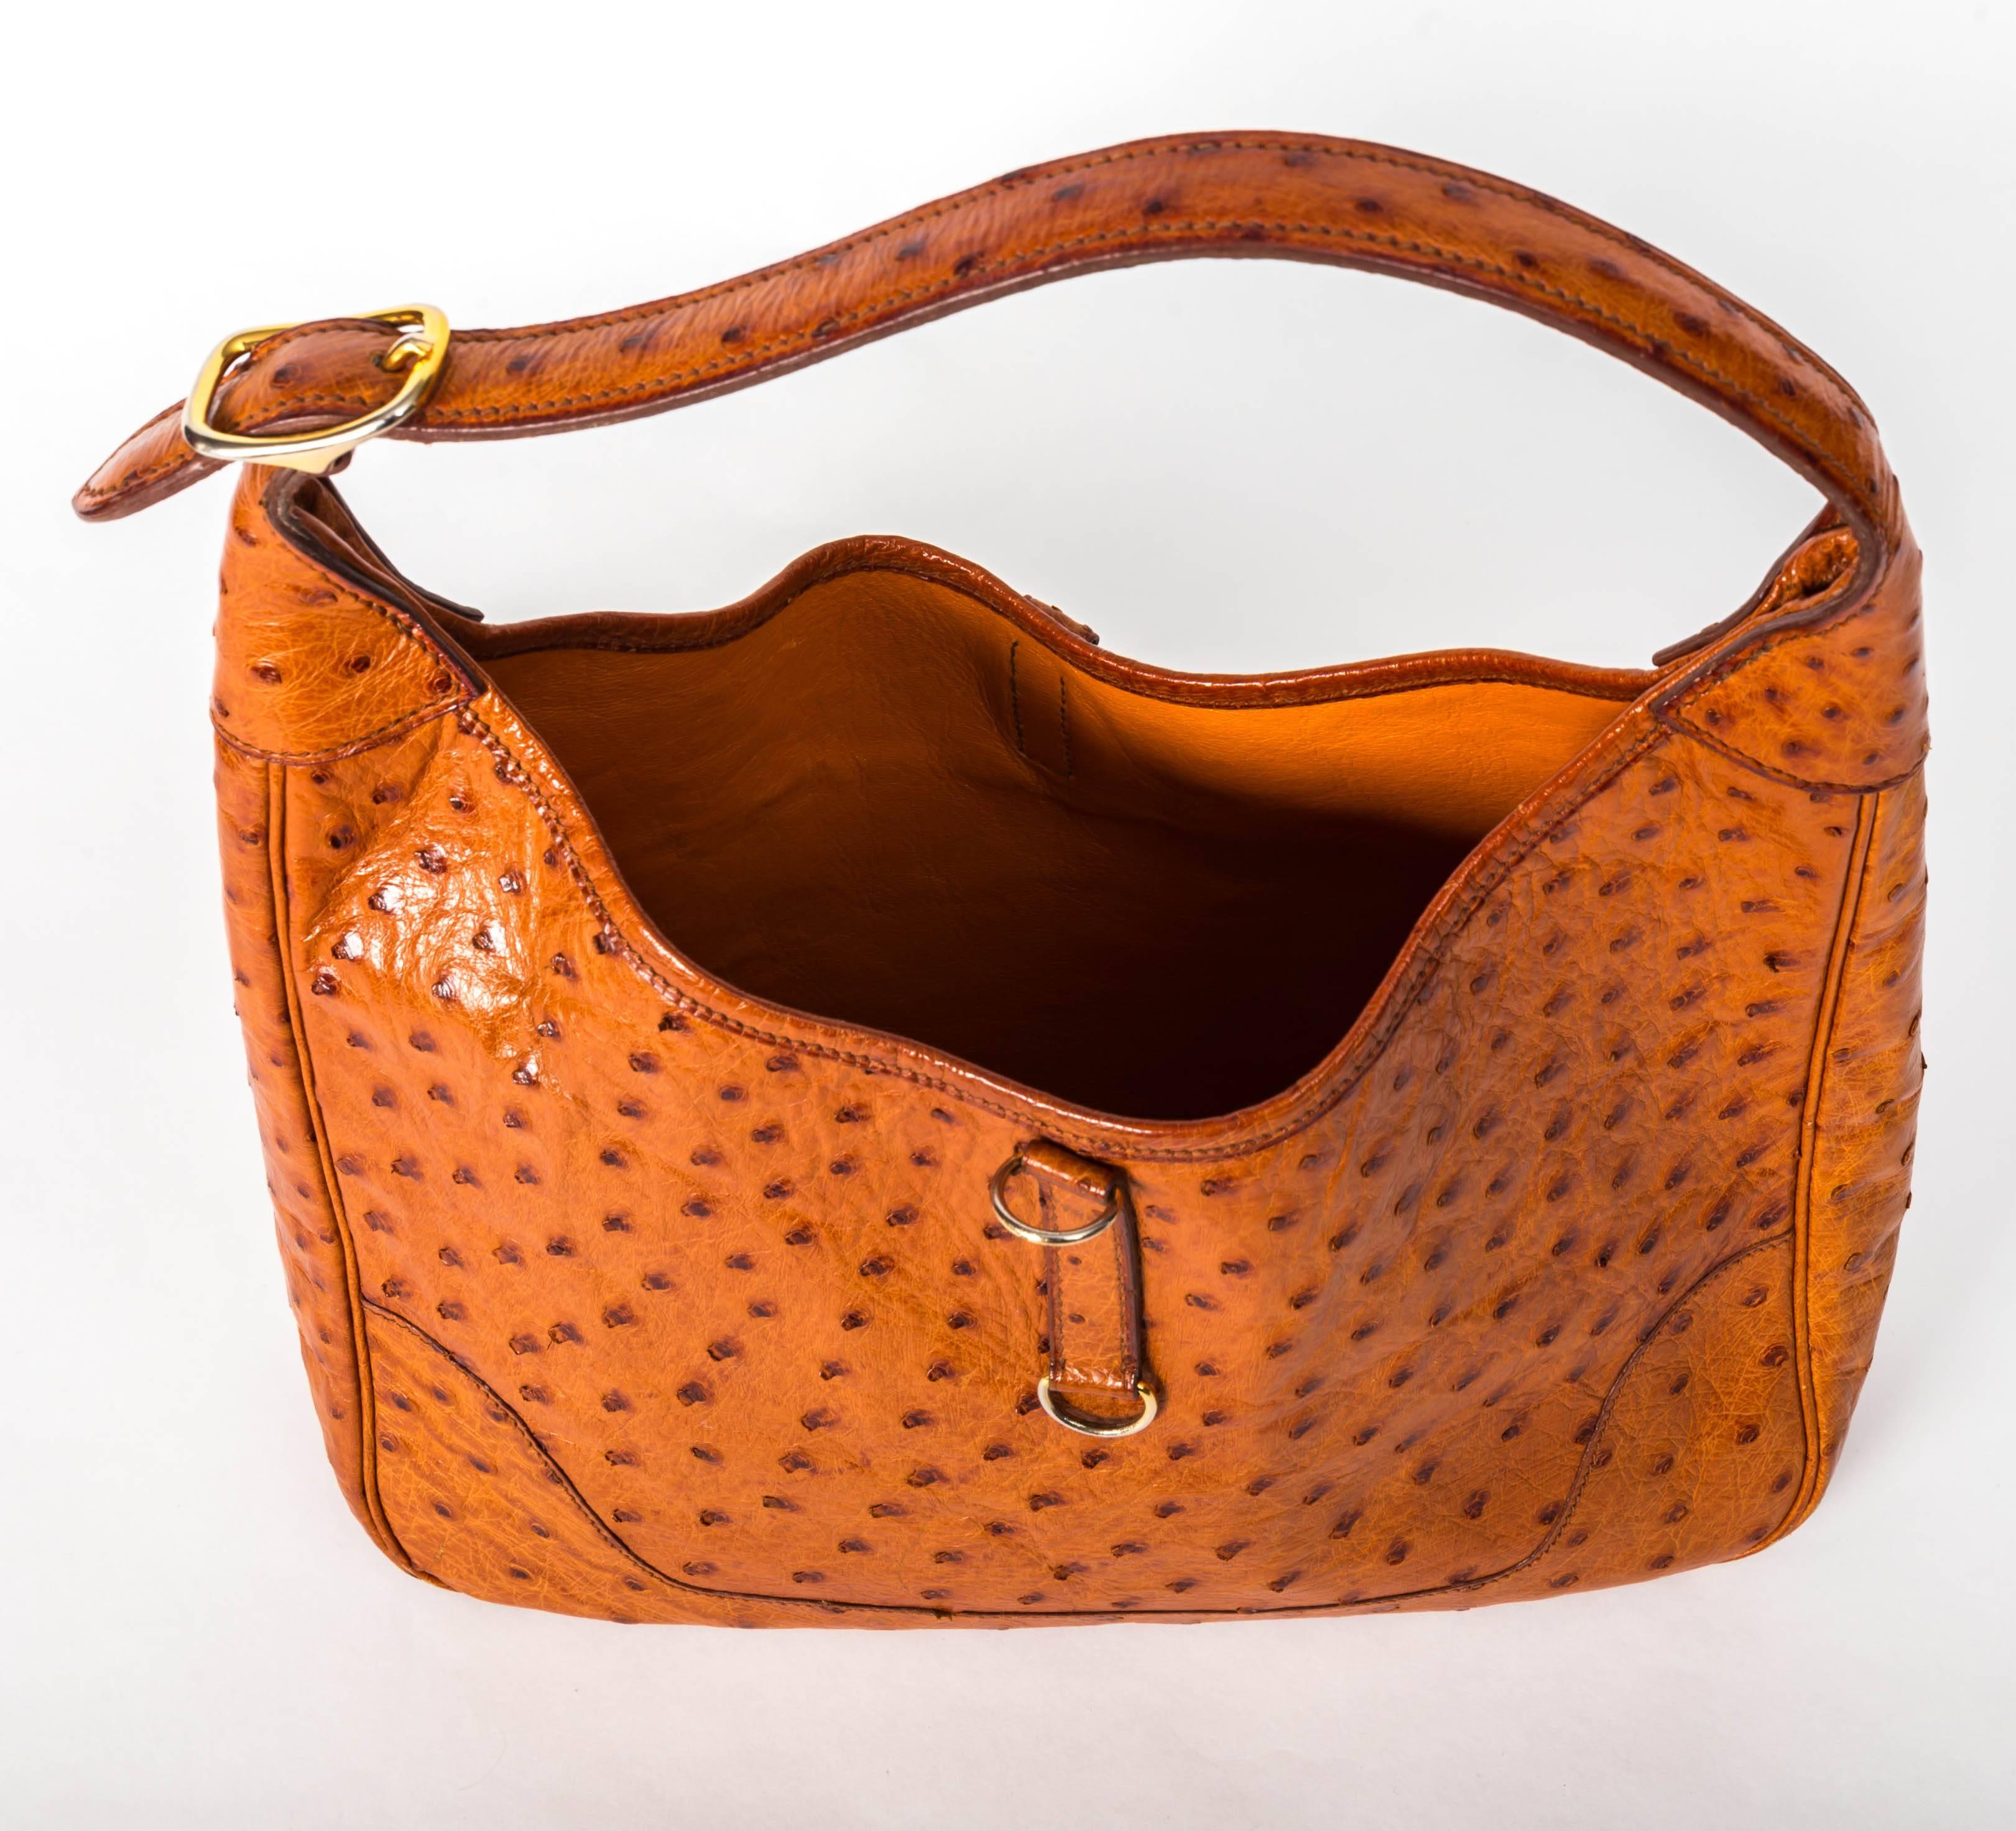 Hermes Tan Ostrich Trim Bag with Gold Hardware 4